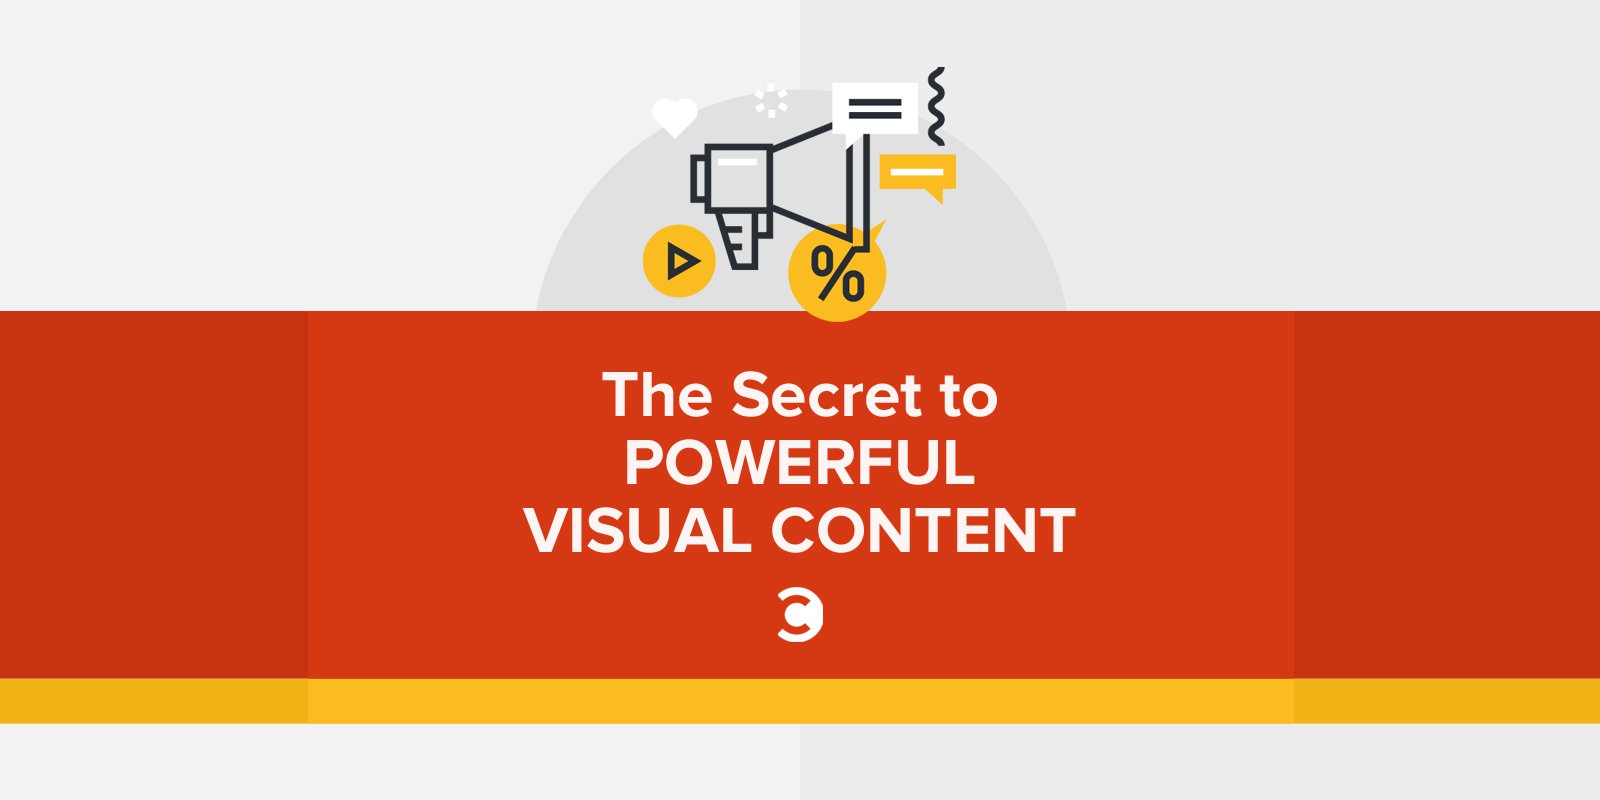 The Secret to Powerful Visual Content1